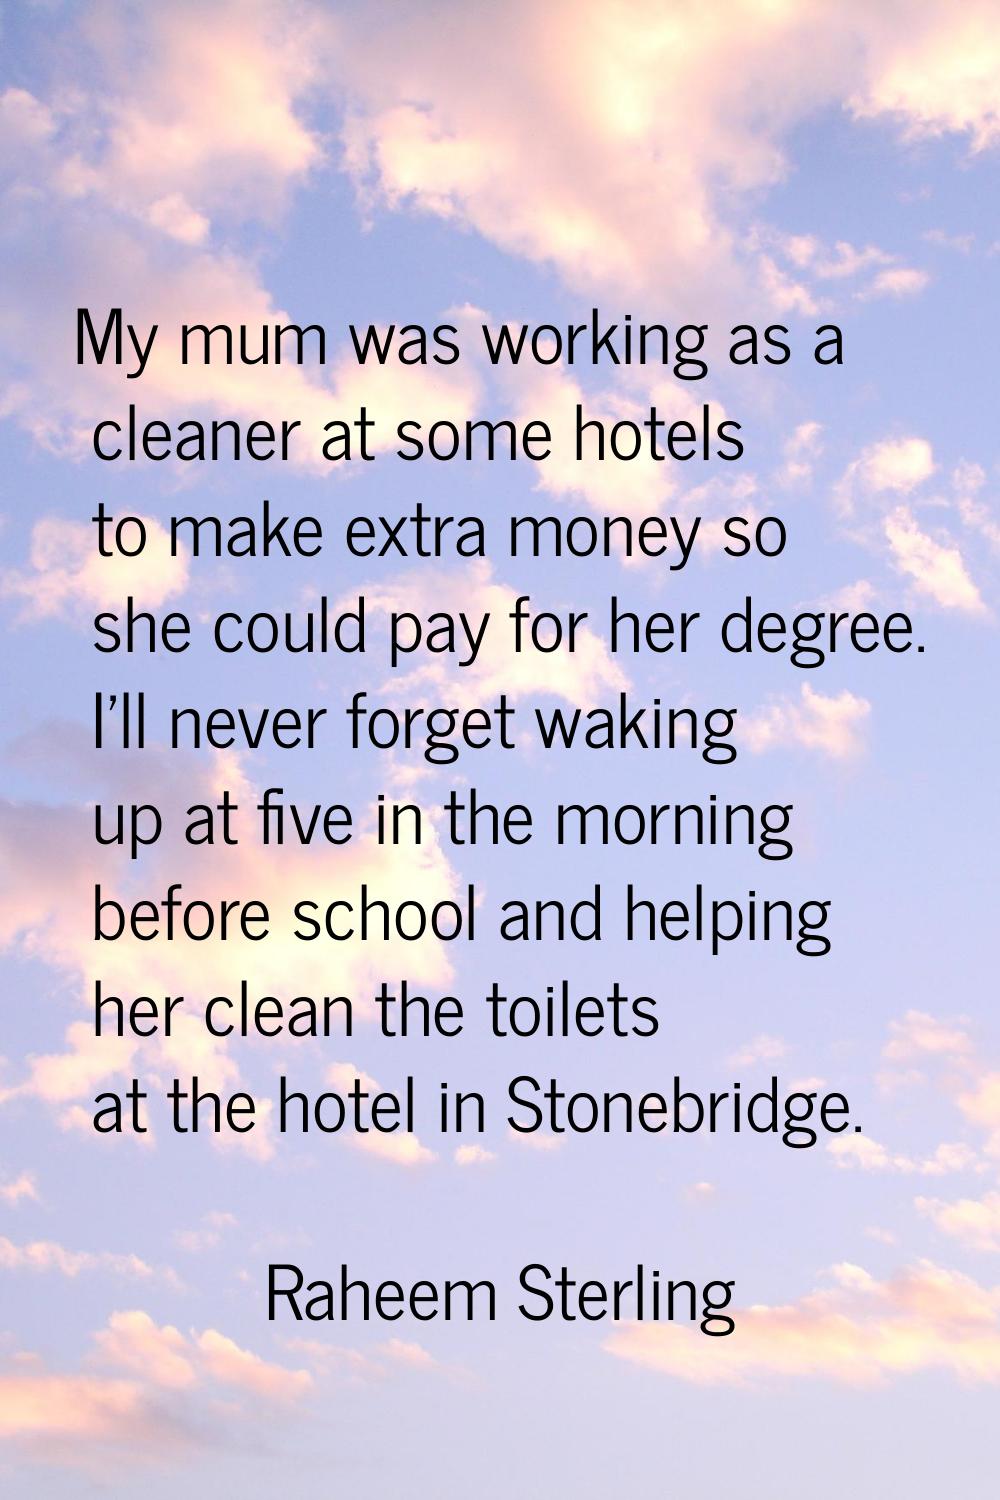 My mum was working as a cleaner at some hotels to make extra money so she could pay for her degree.